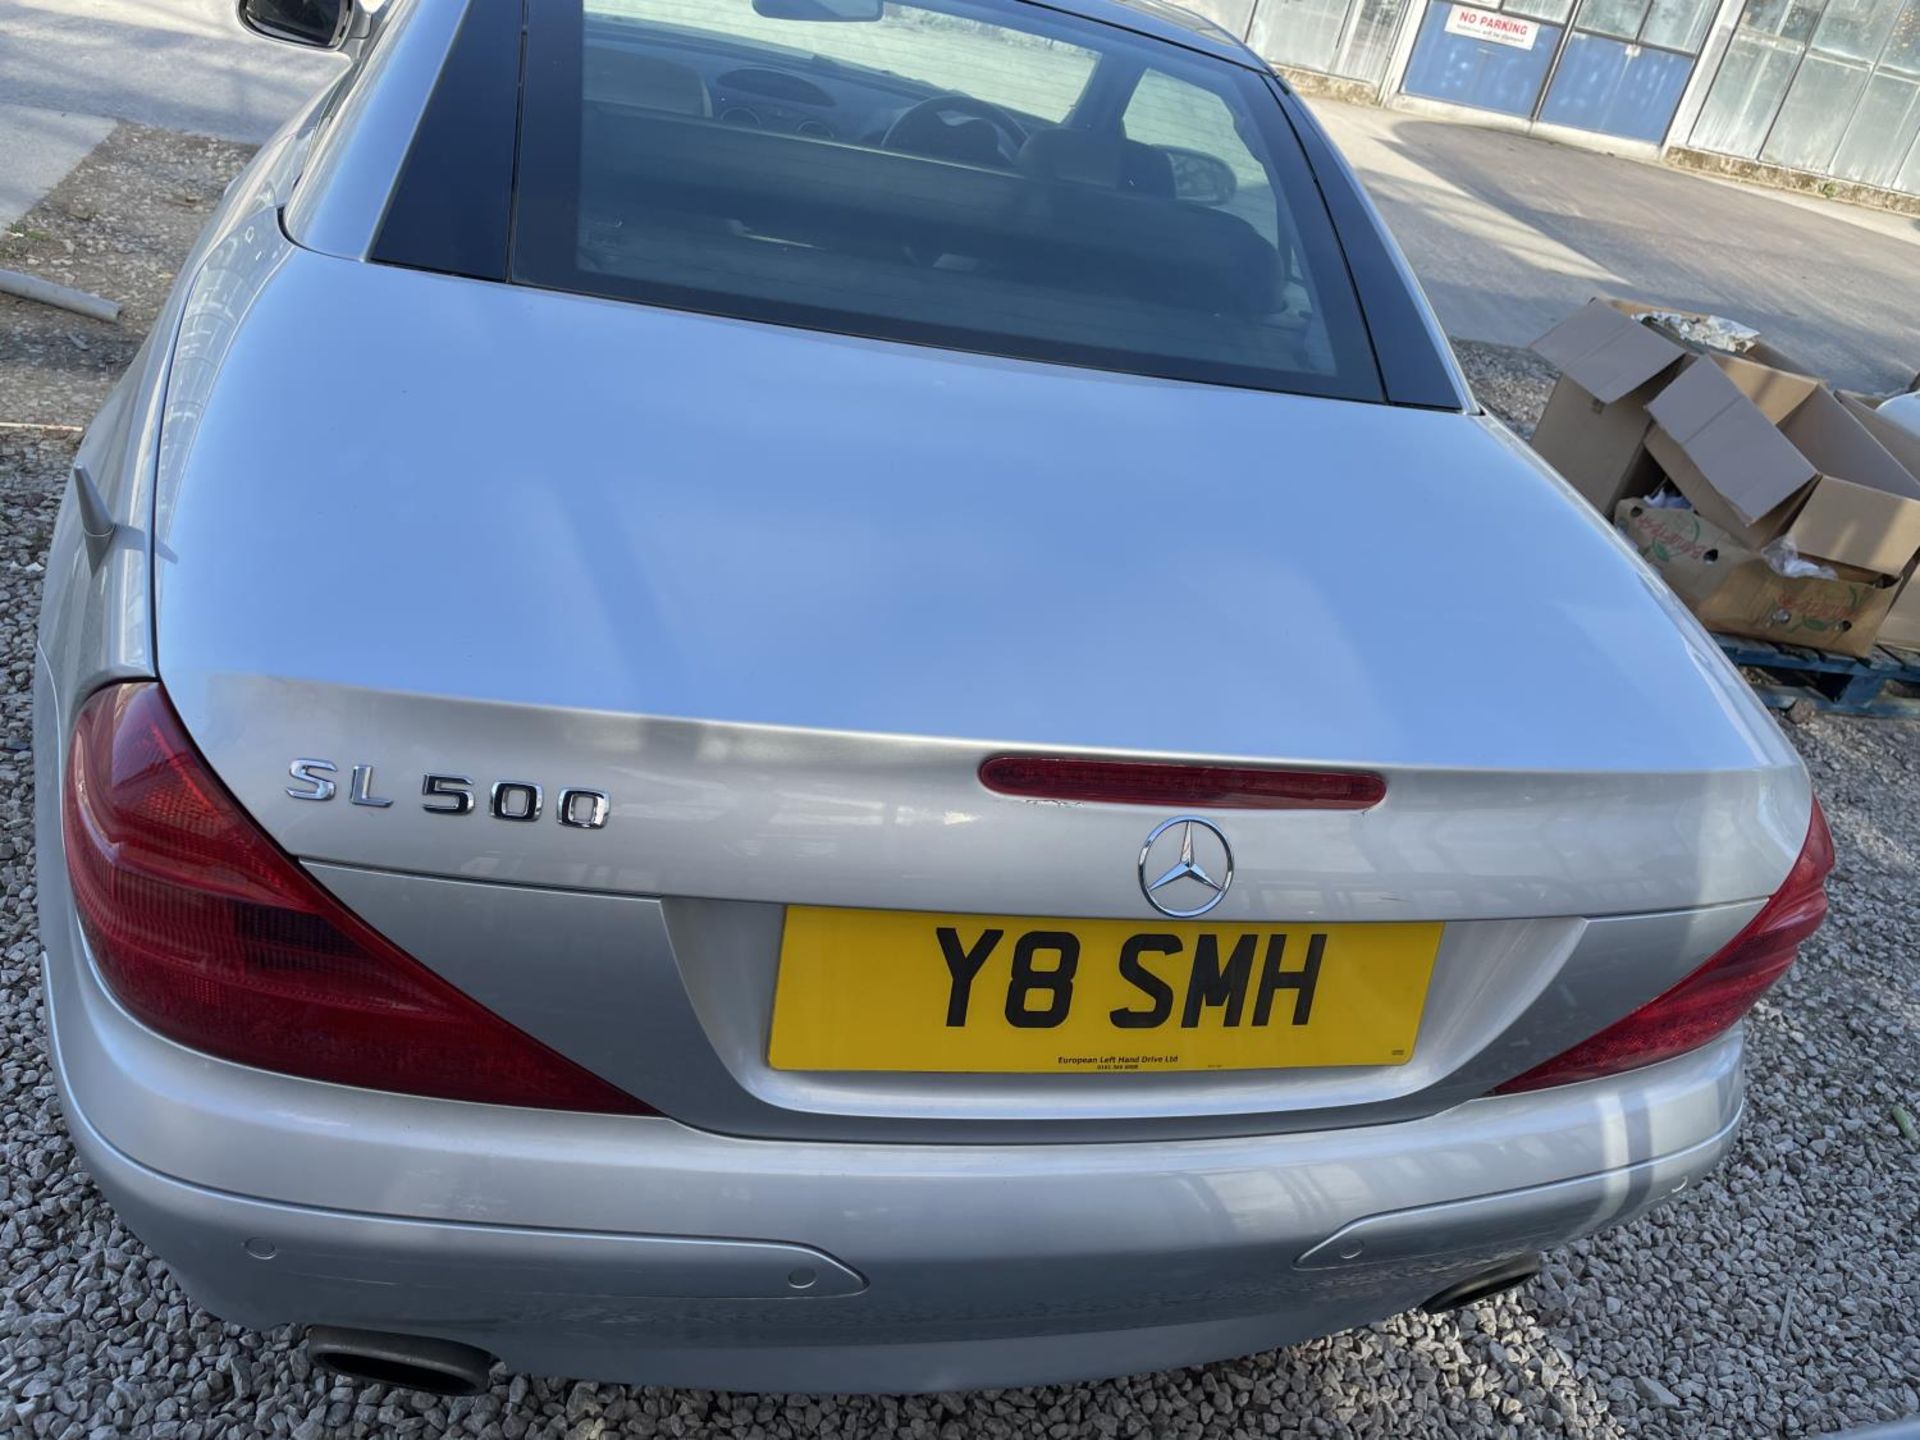 A 2004 MERCEDES SL 350 AUTO CONVERTIBLE. REGISTRATION Y8 SMH. 3724 CC FROM A DECEASED'S ESTATE ( - Image 7 of 21